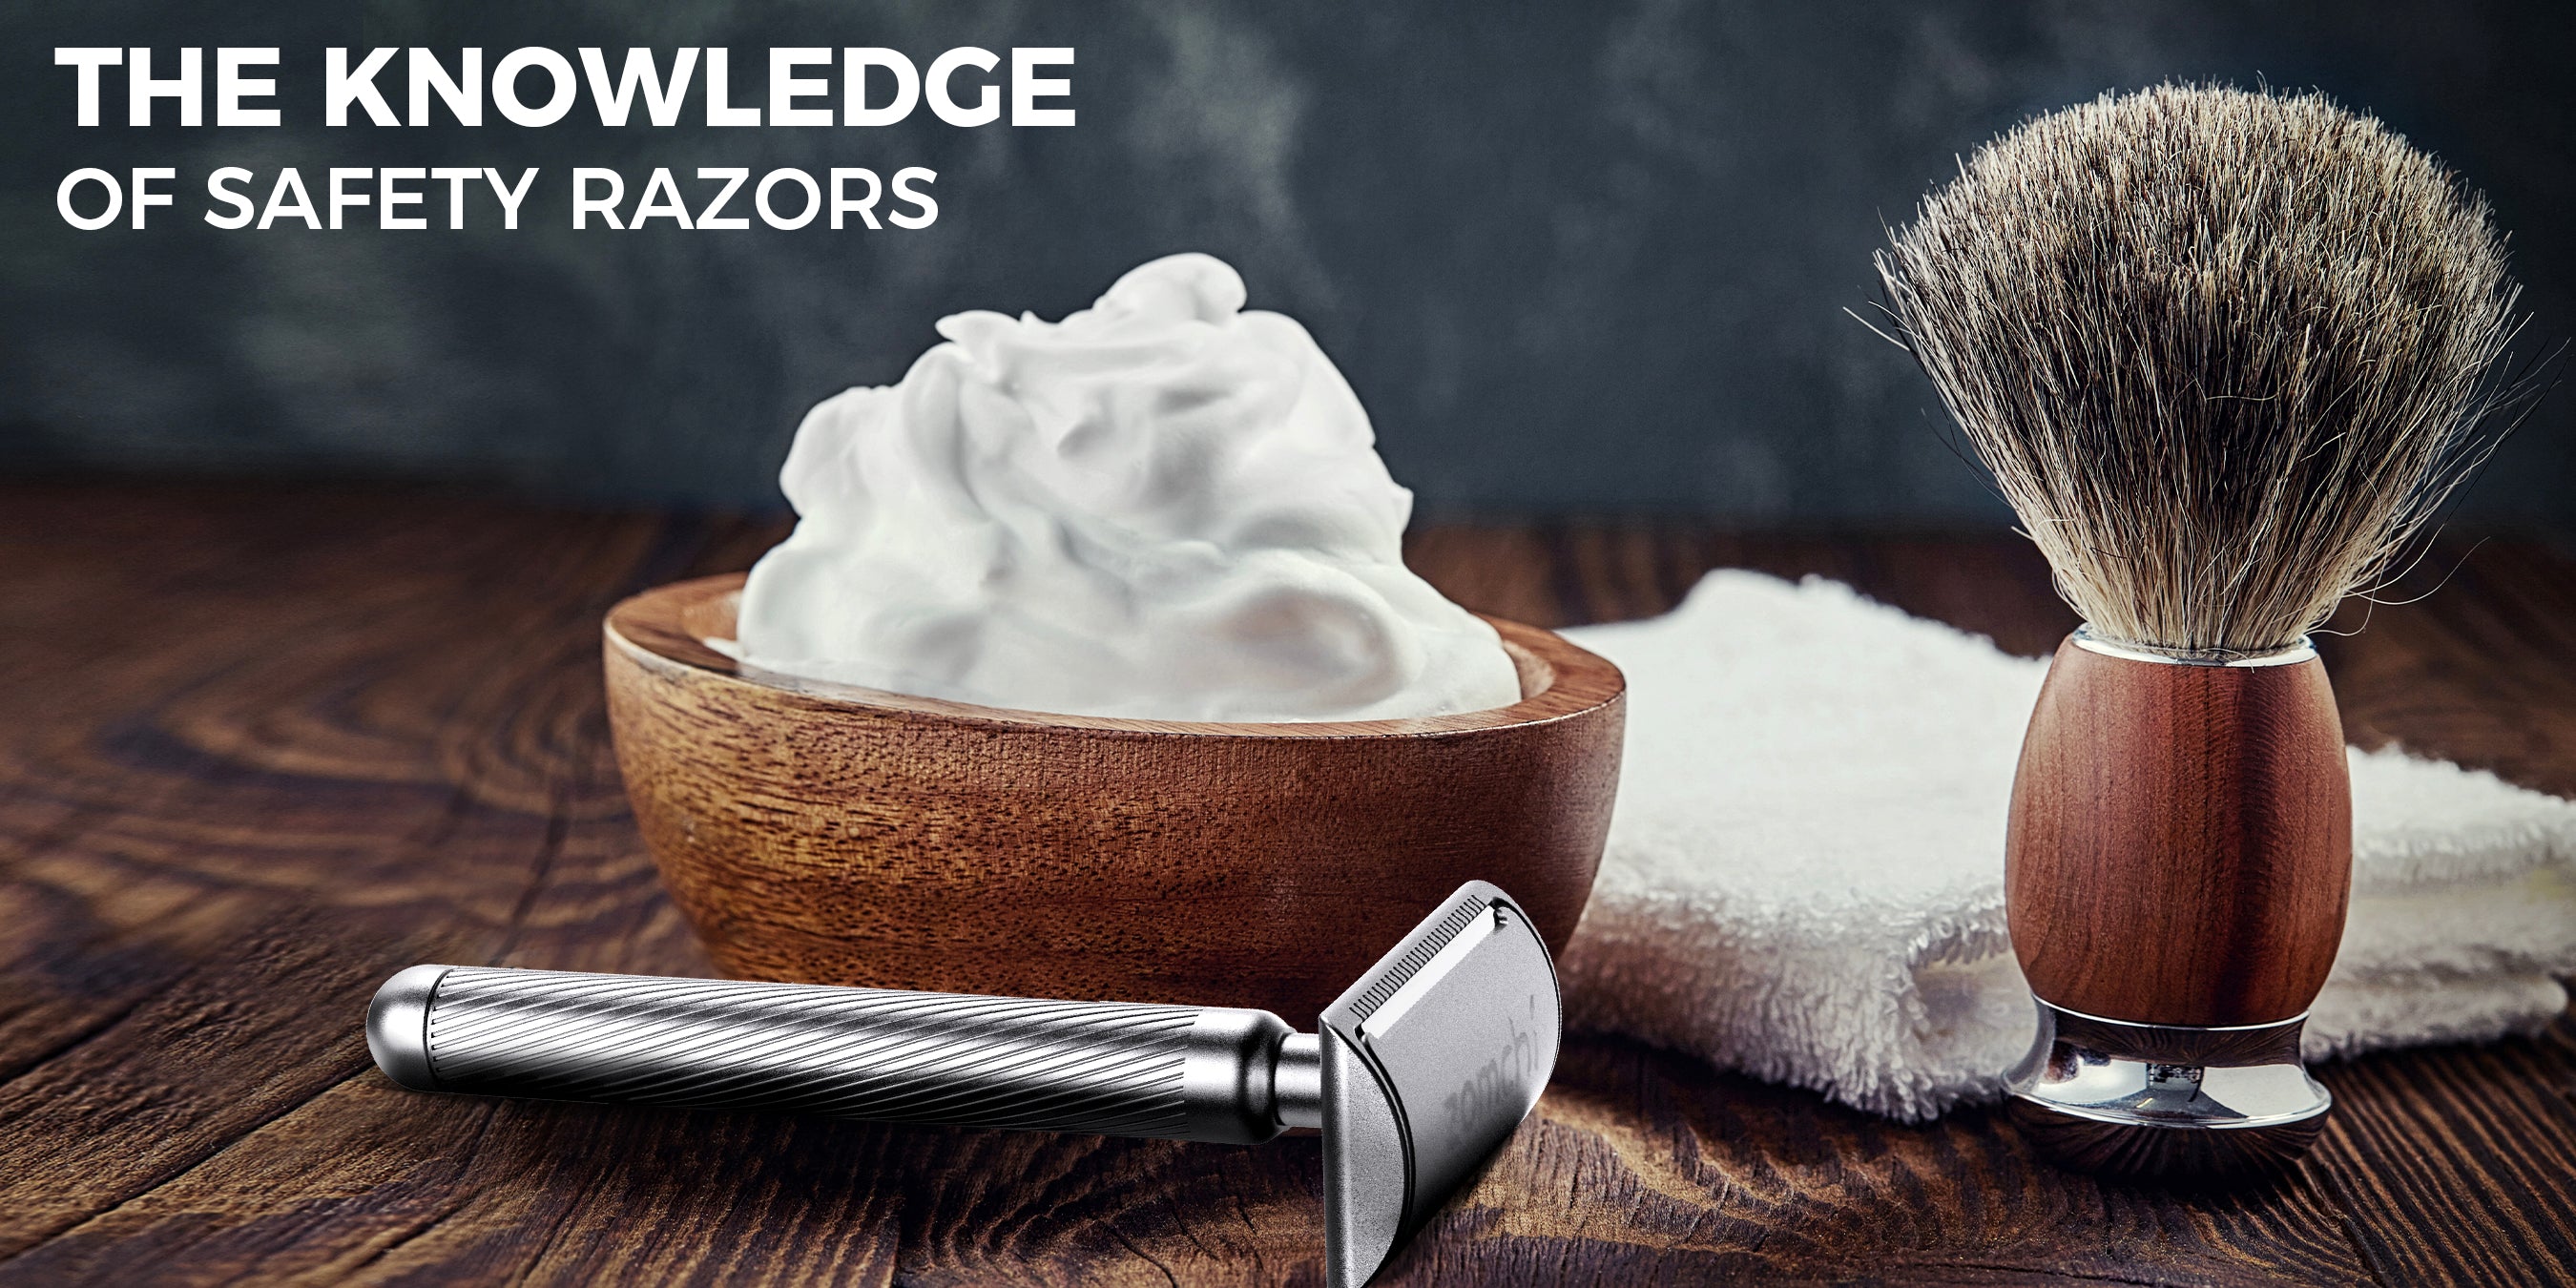 The knowledge of safety razors